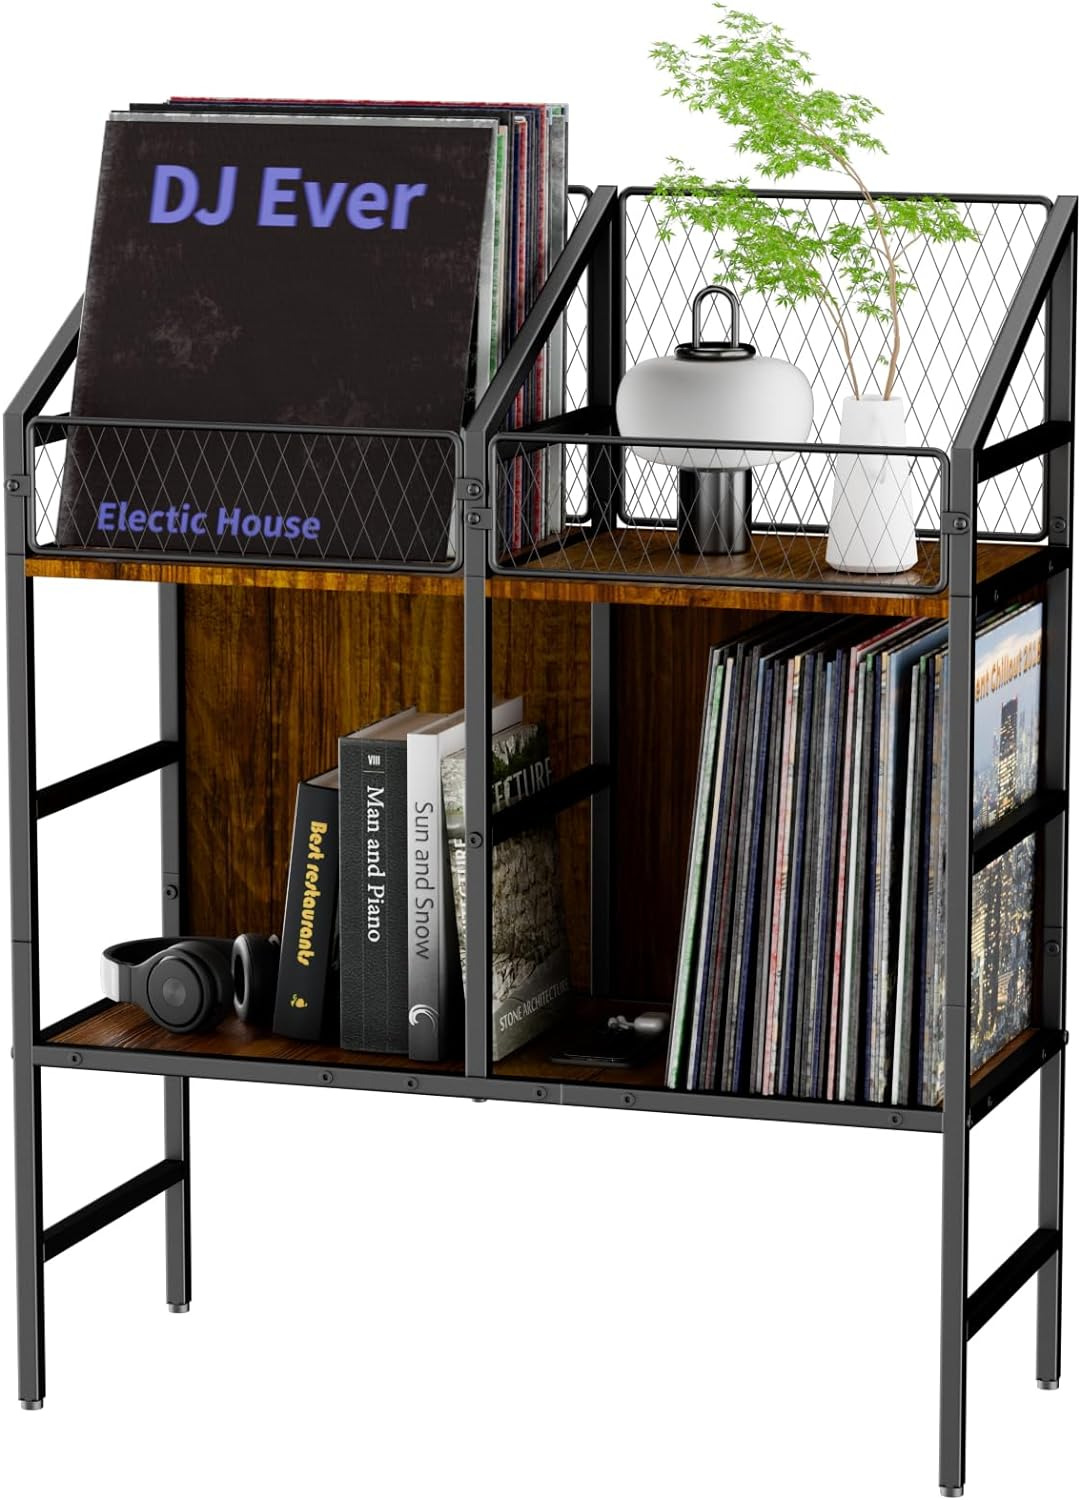 Vinyl Record Holder Storage Rack,200 LP Wooden Record Display Table for Albums B